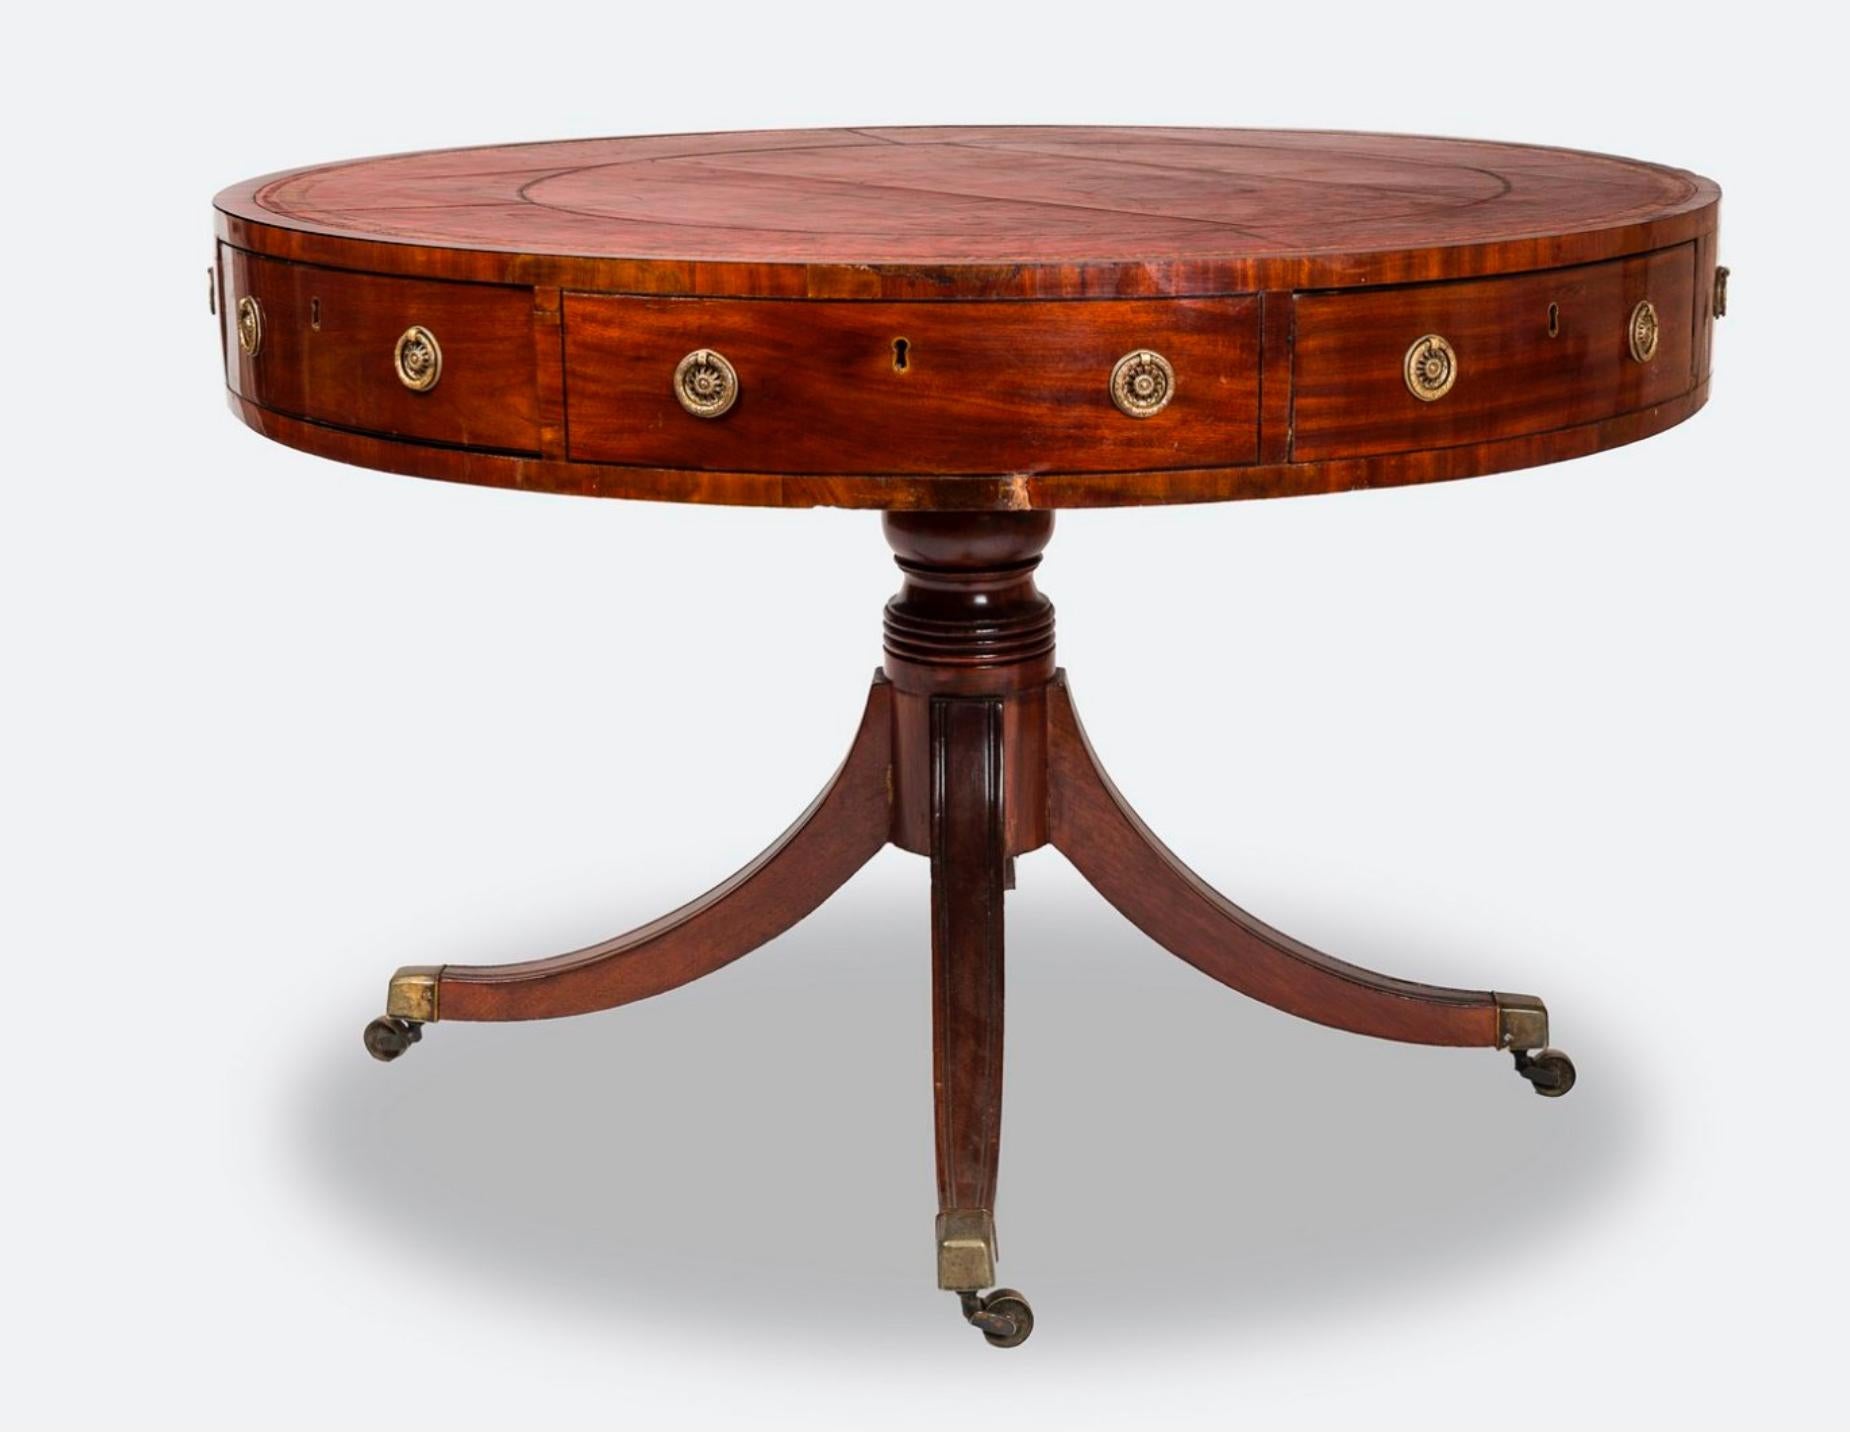 Regency 19th Century French Centre Pedestal Table in Mahogany and Red Leather Top